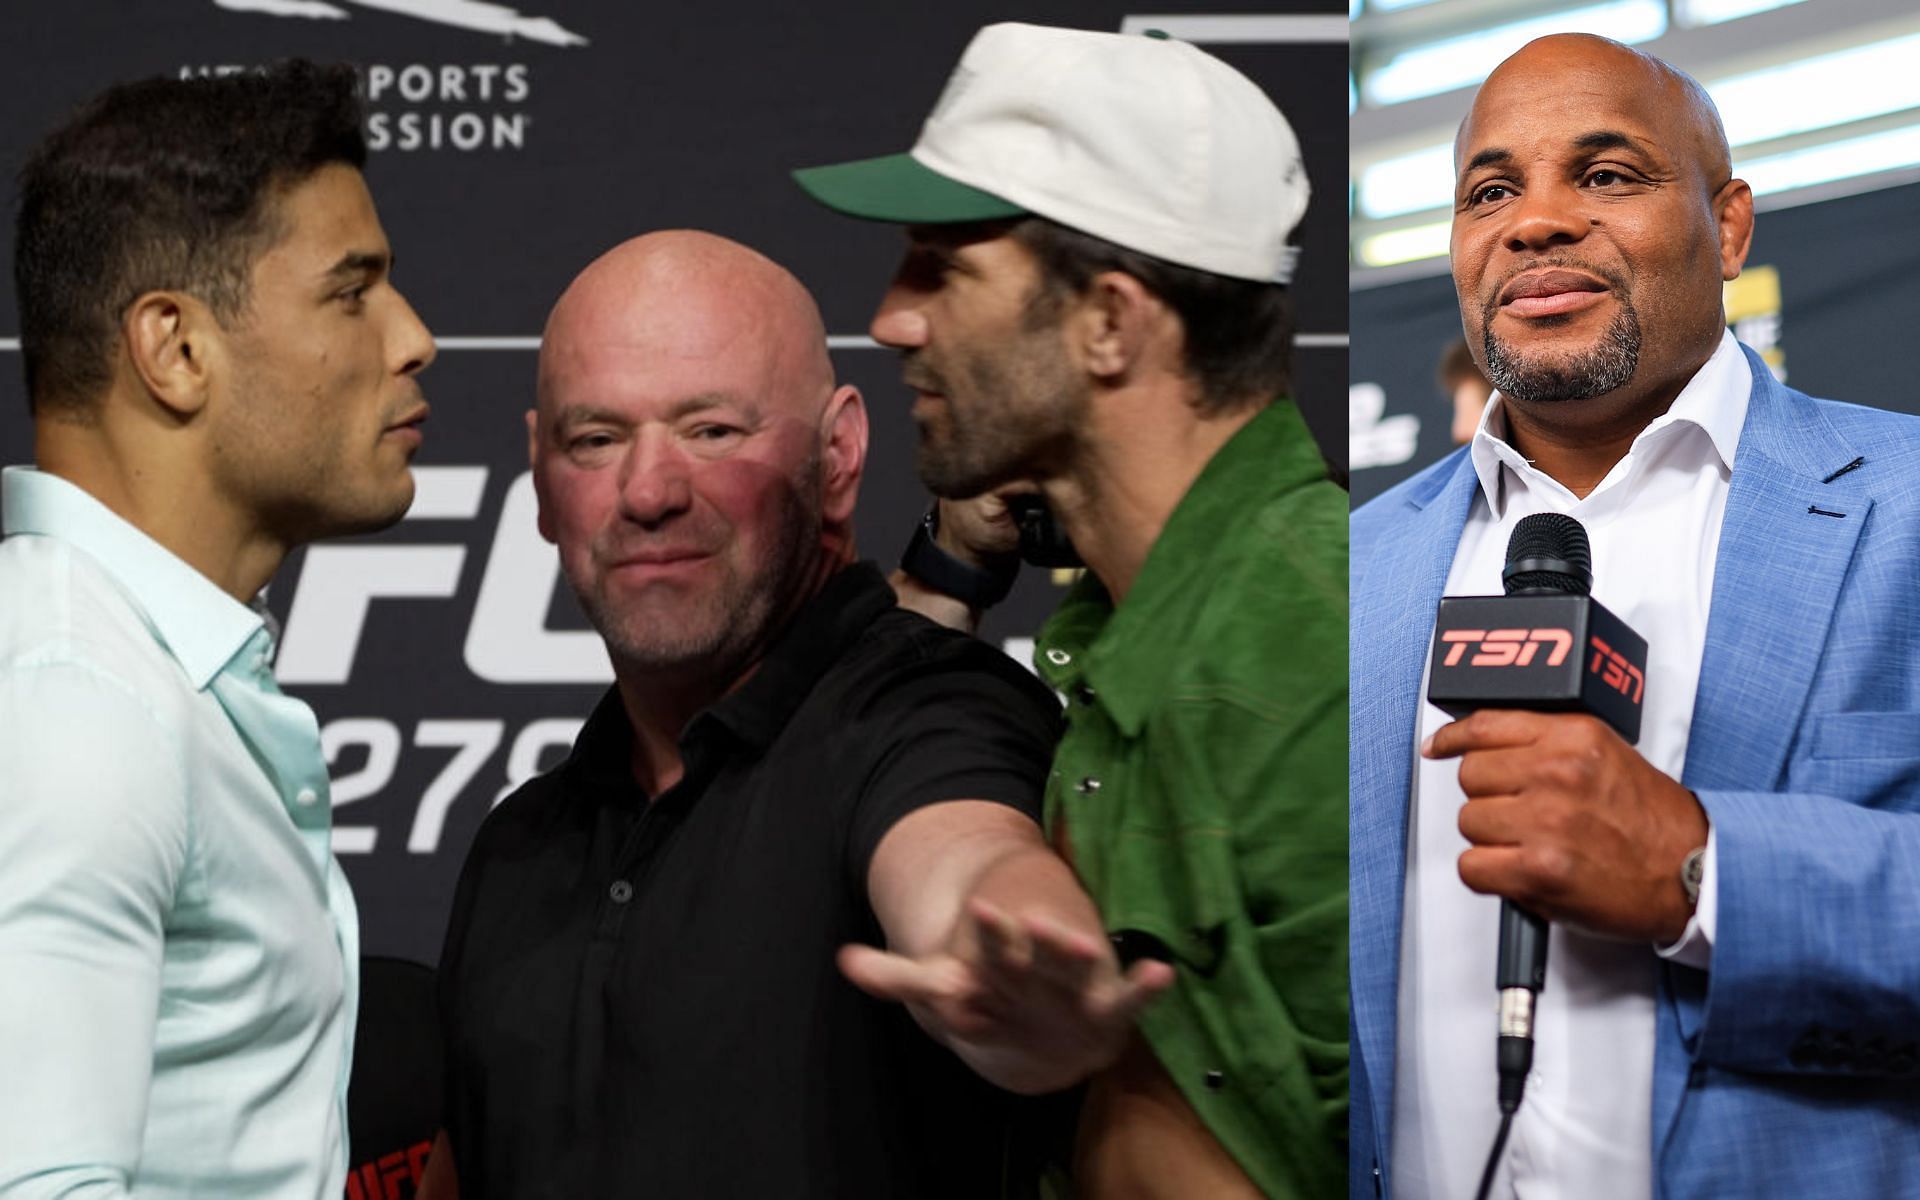 Paulo Costa and Luke Rockhold (left) and Daniel Cormier (right). [Images courtesy: left image from Yahoo and right image from Getty Images]